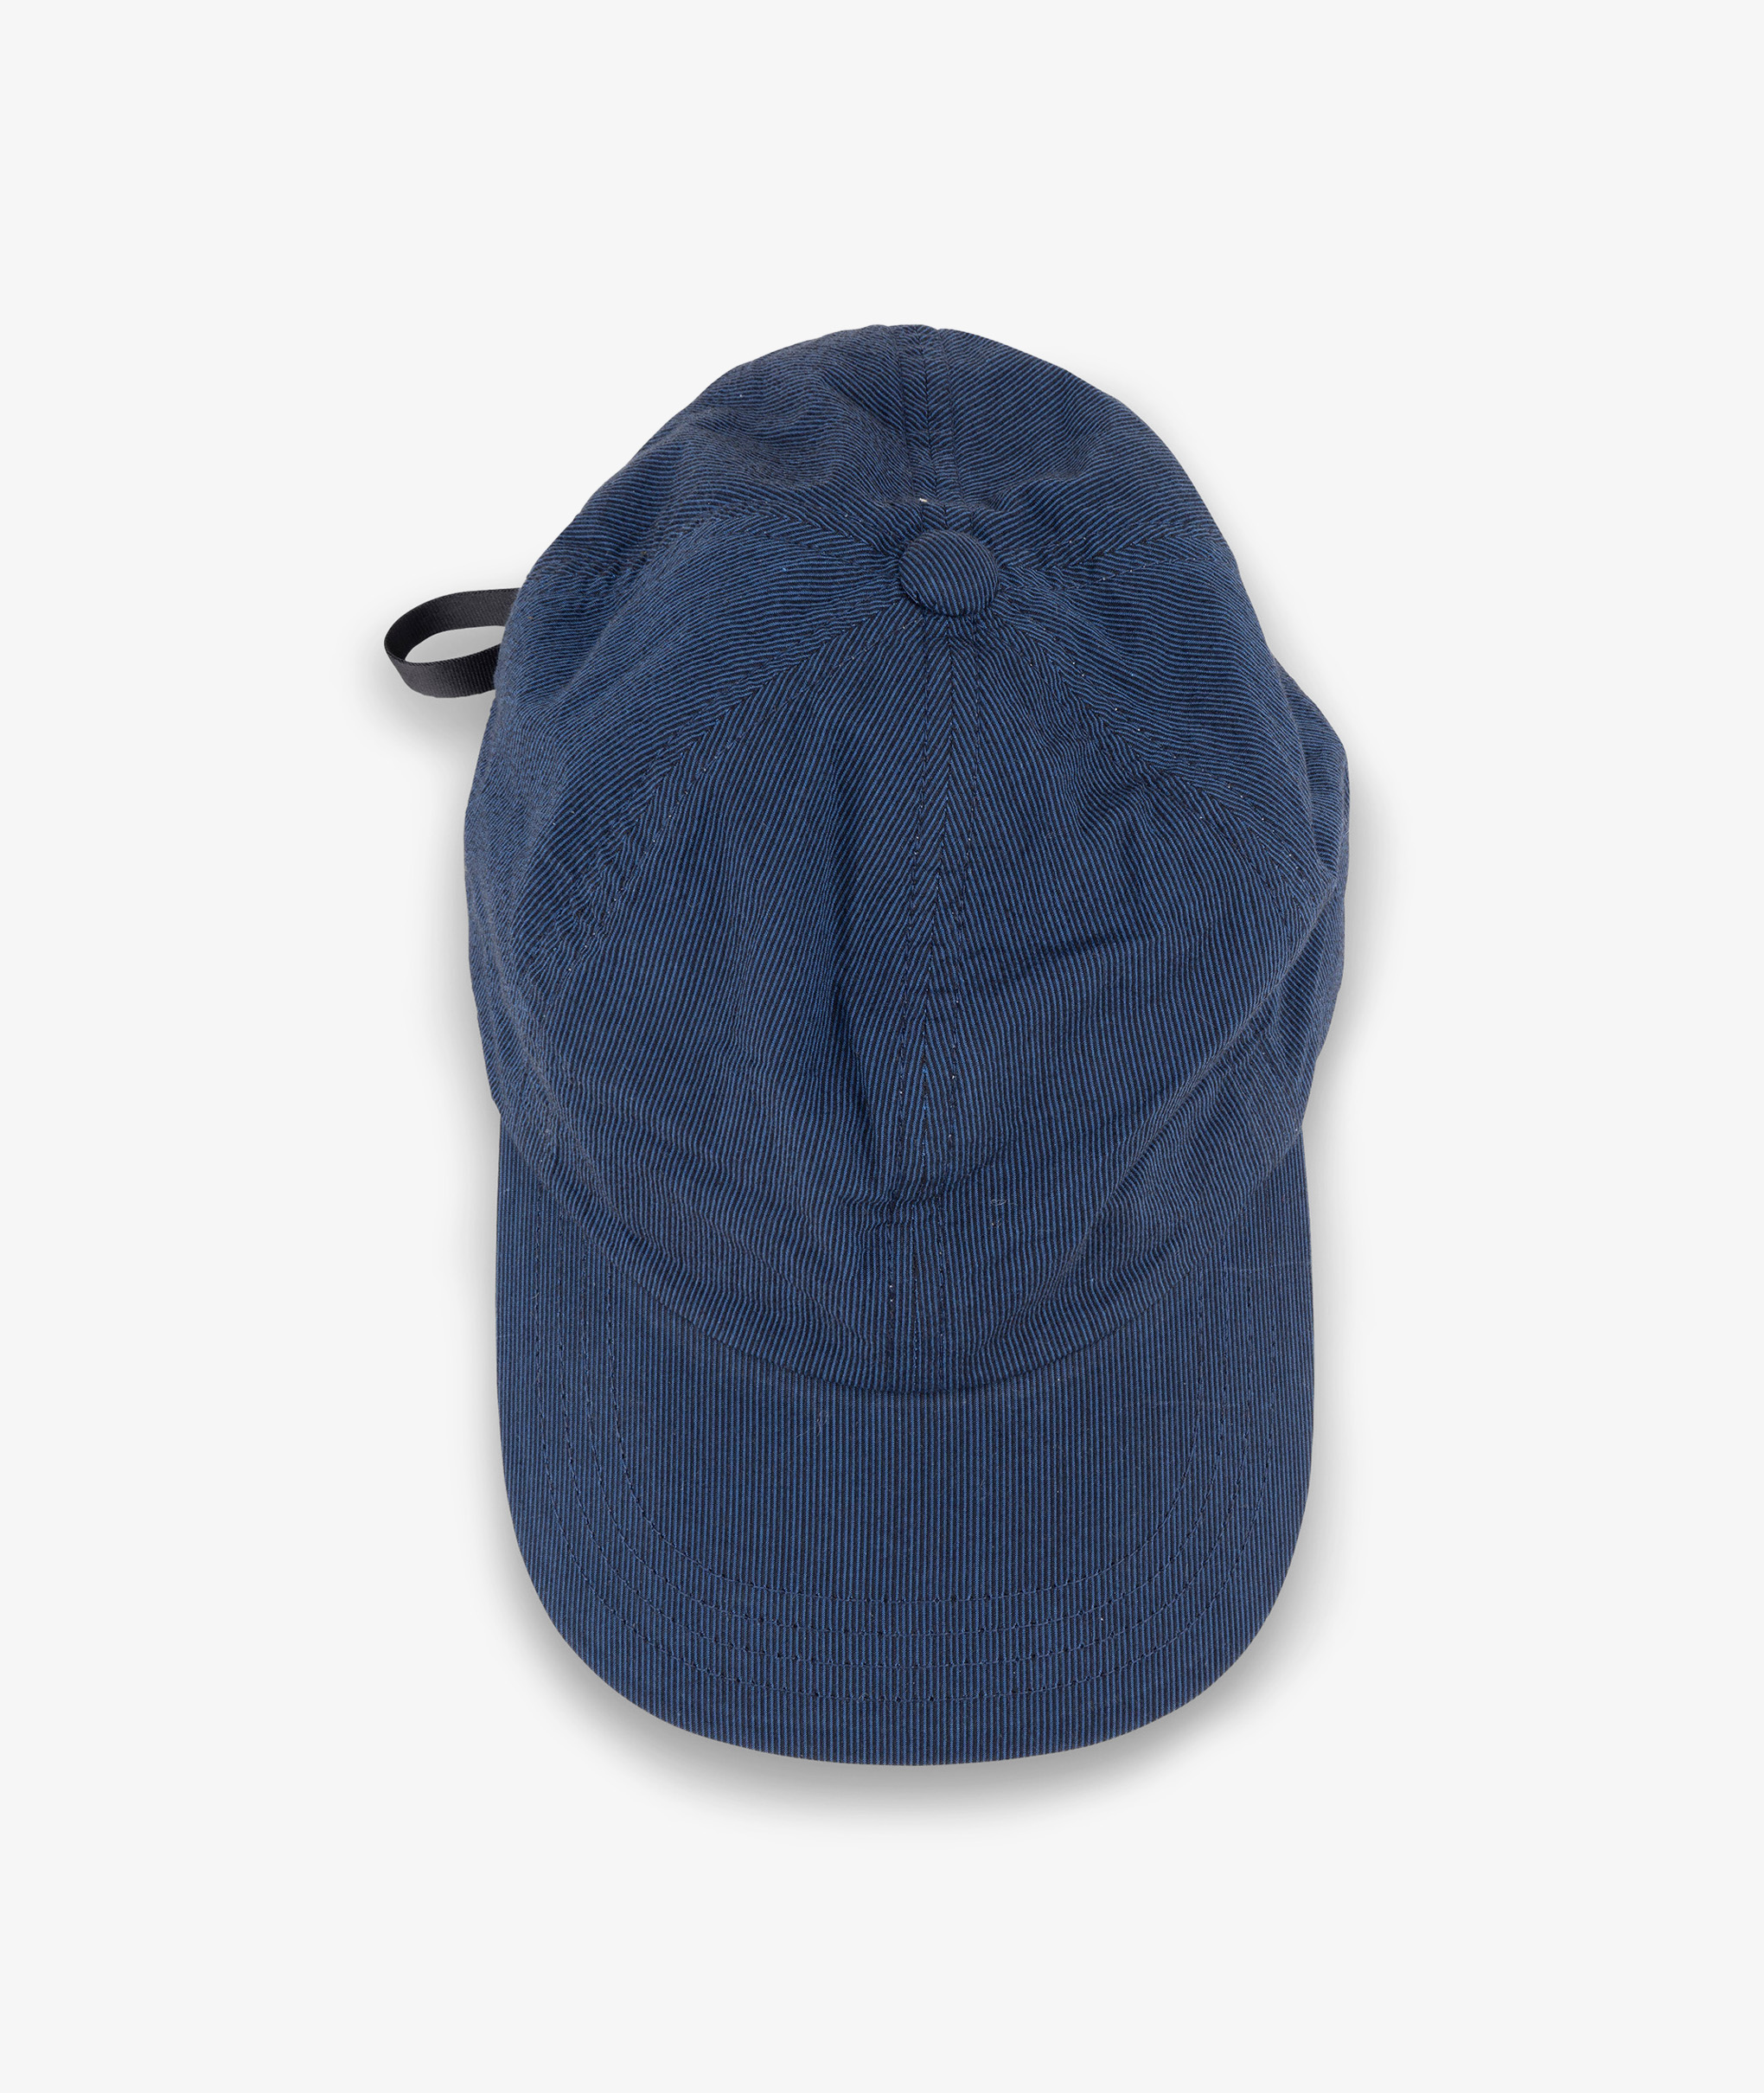 Norse Store | Shipping Worldwide - MAN-TLE R15 CAP-3 - CURRENT